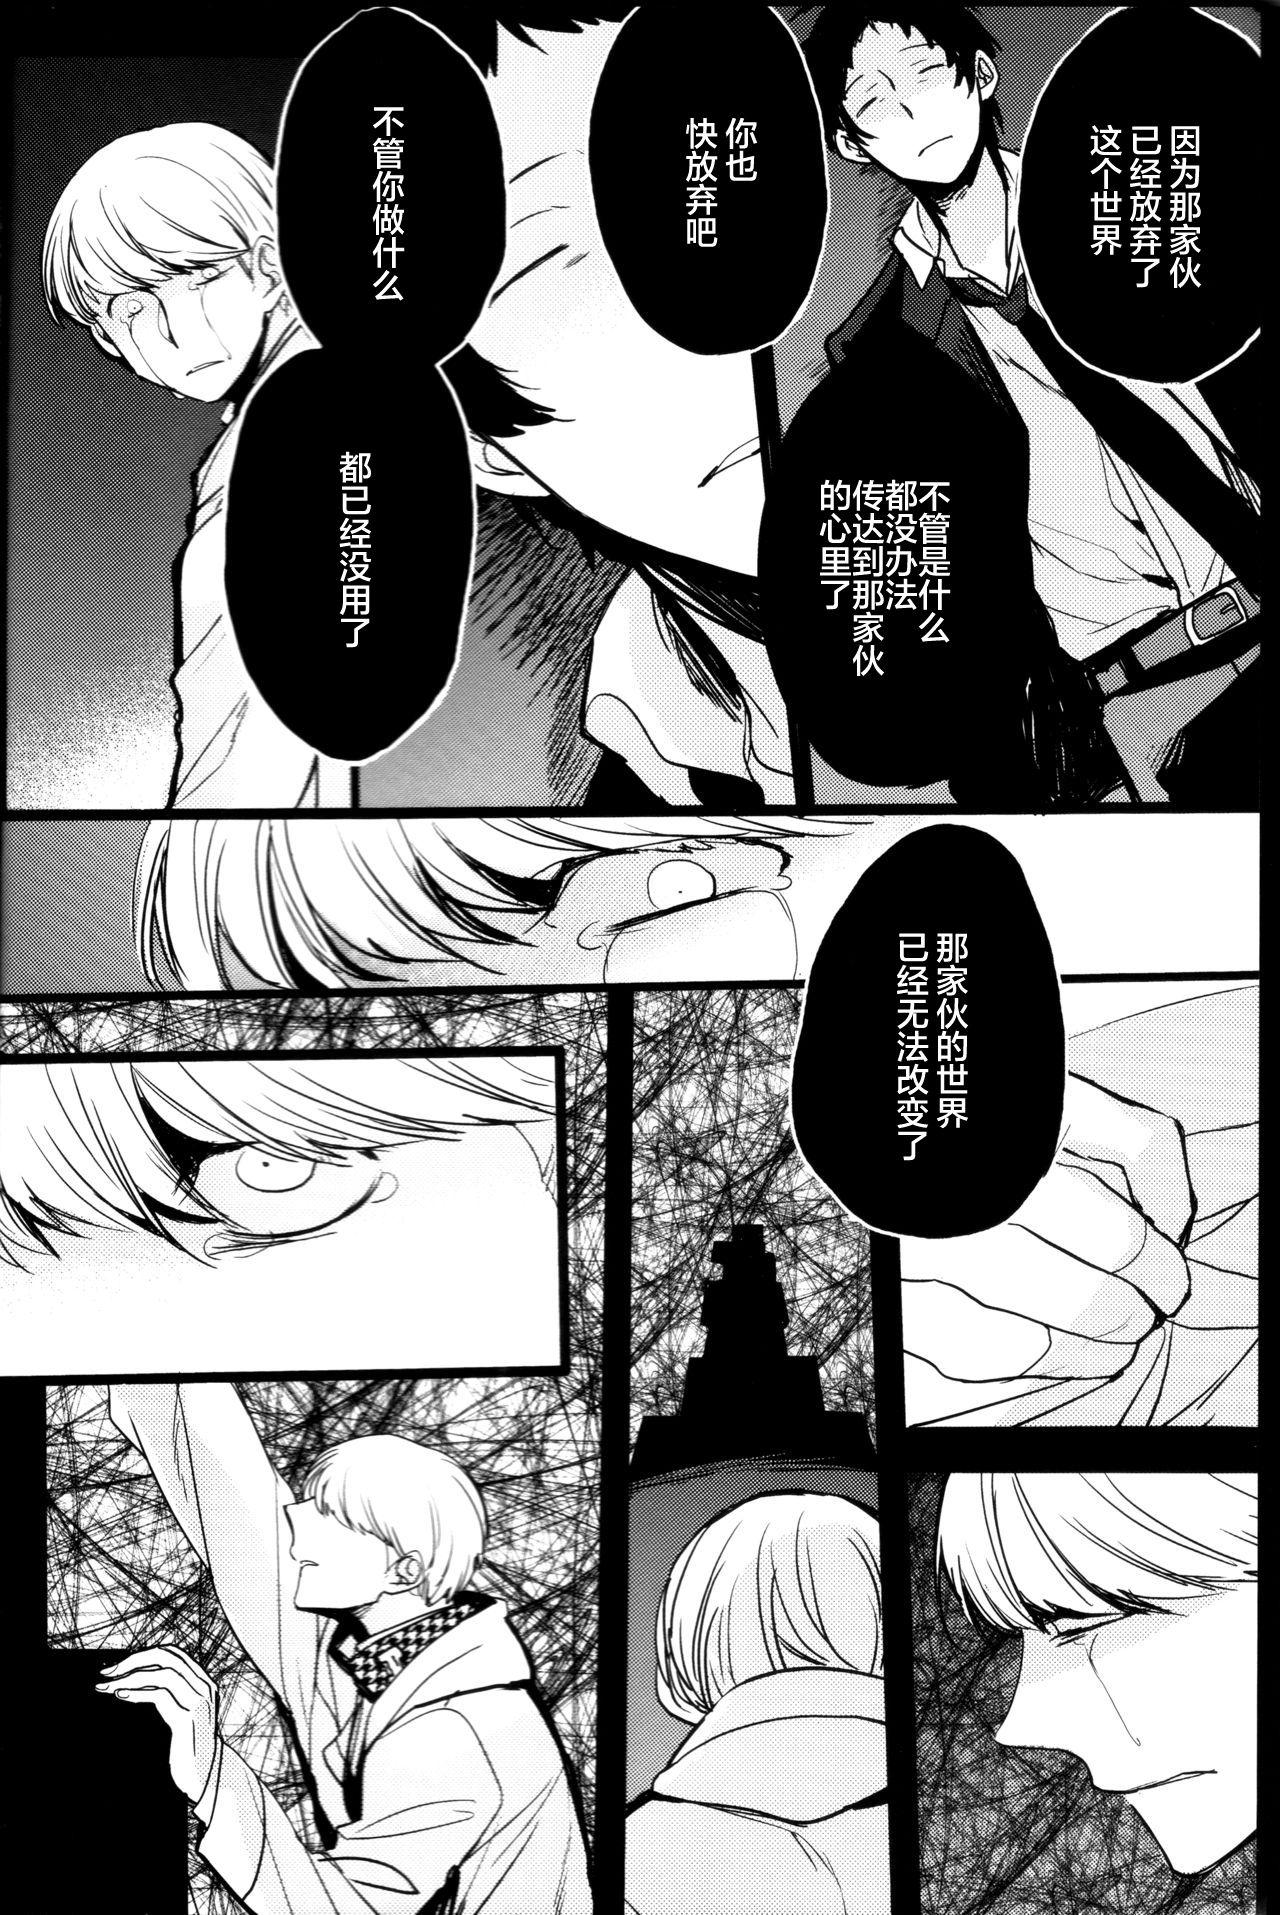 Petite Teenager The End Of The World Volume 3 - Persona 4 Con - Page 8